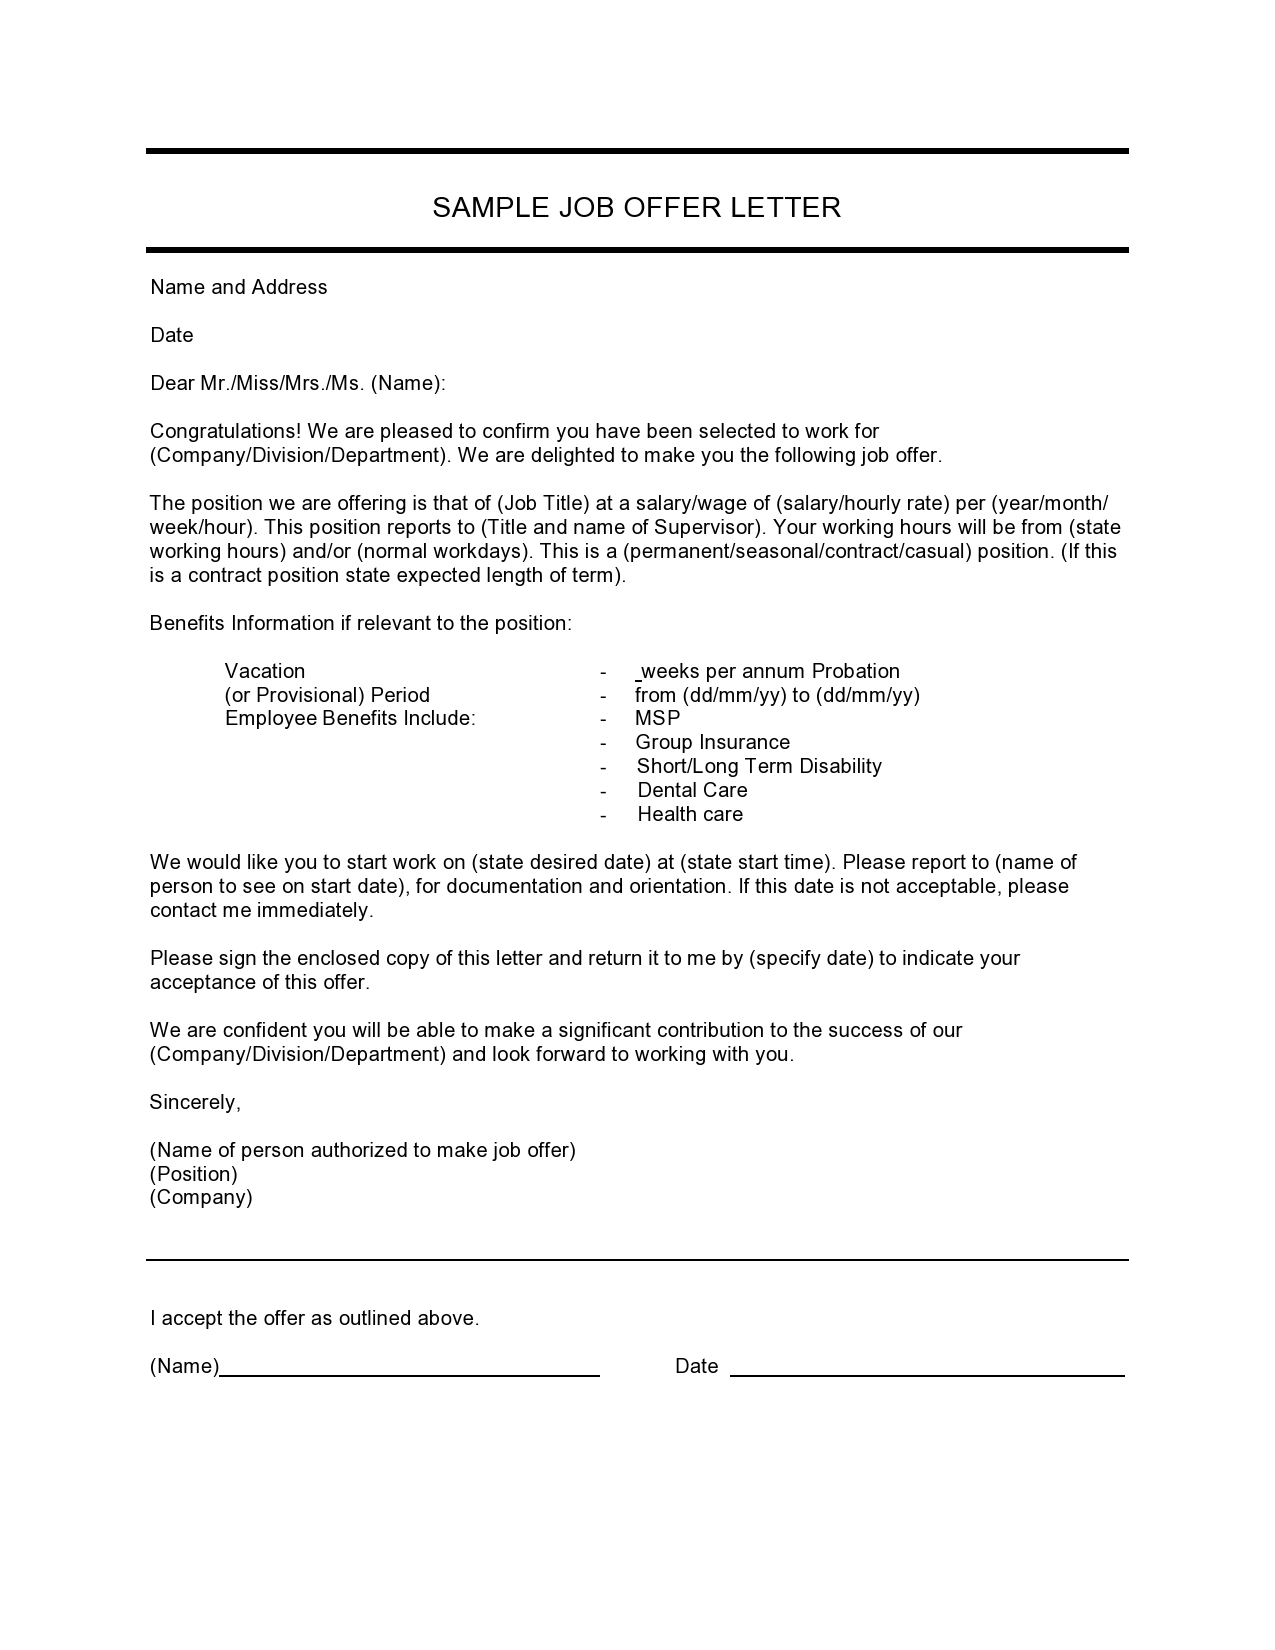 Free employment offer letter template 26